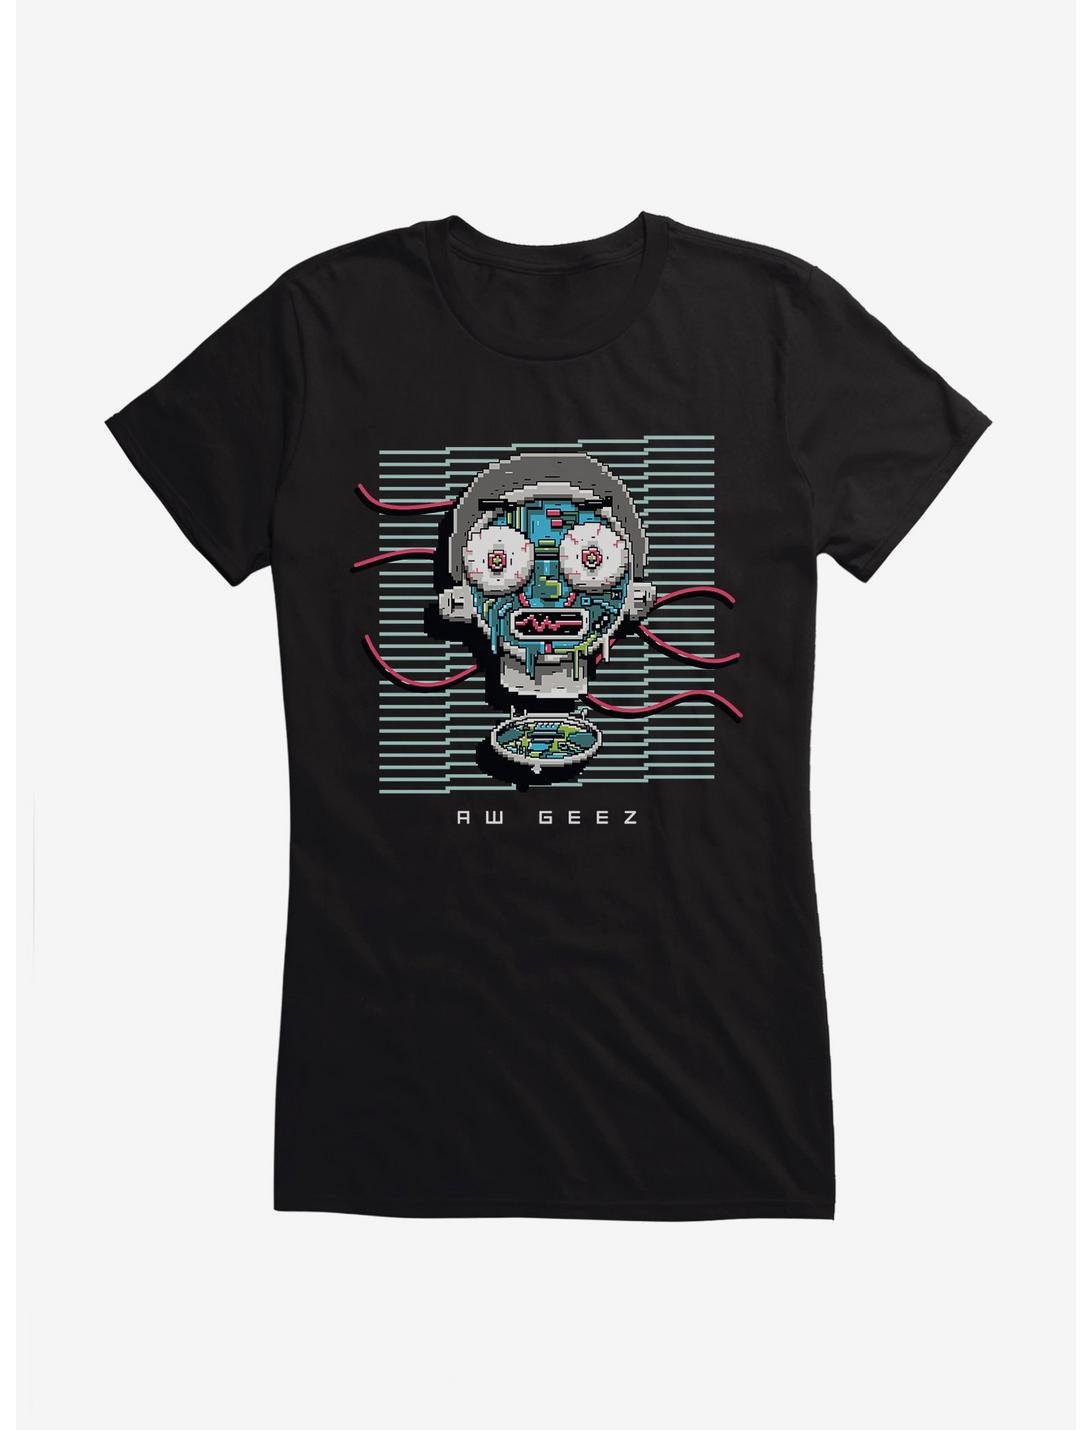 Rick And Morty Aw Geez Girls T-Shirt, , hi-res